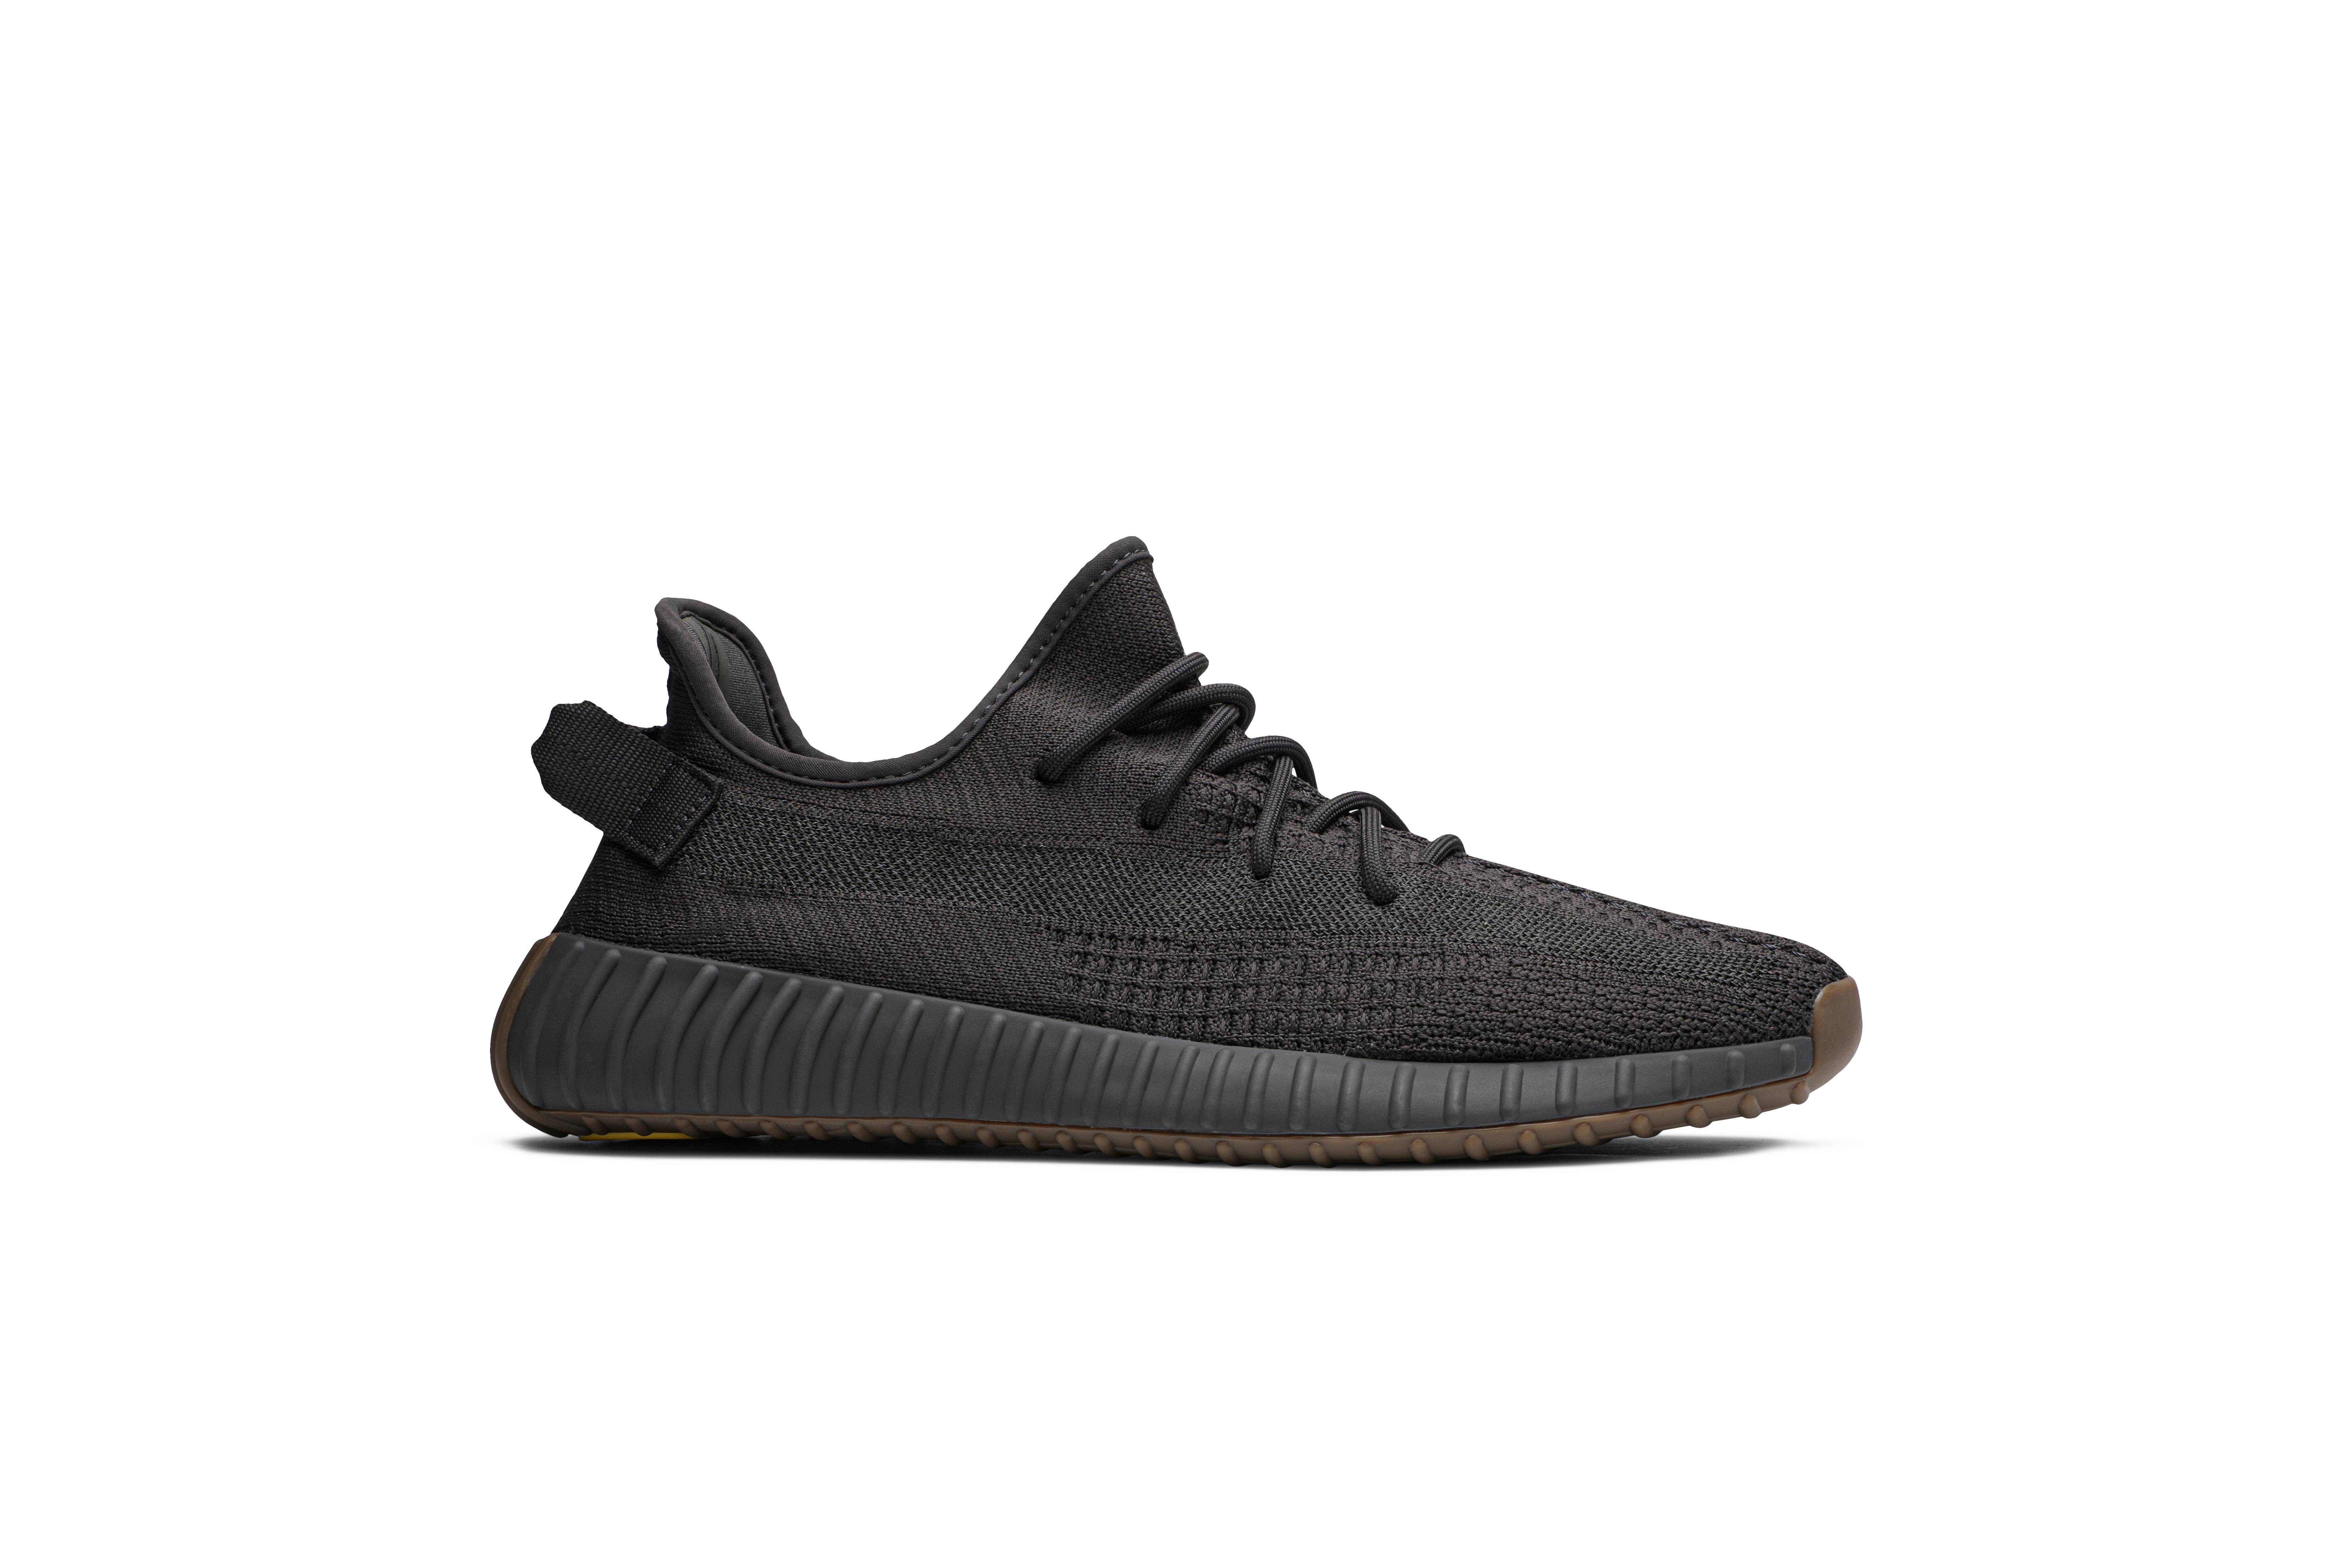 yeezy boost cinder reflective release date